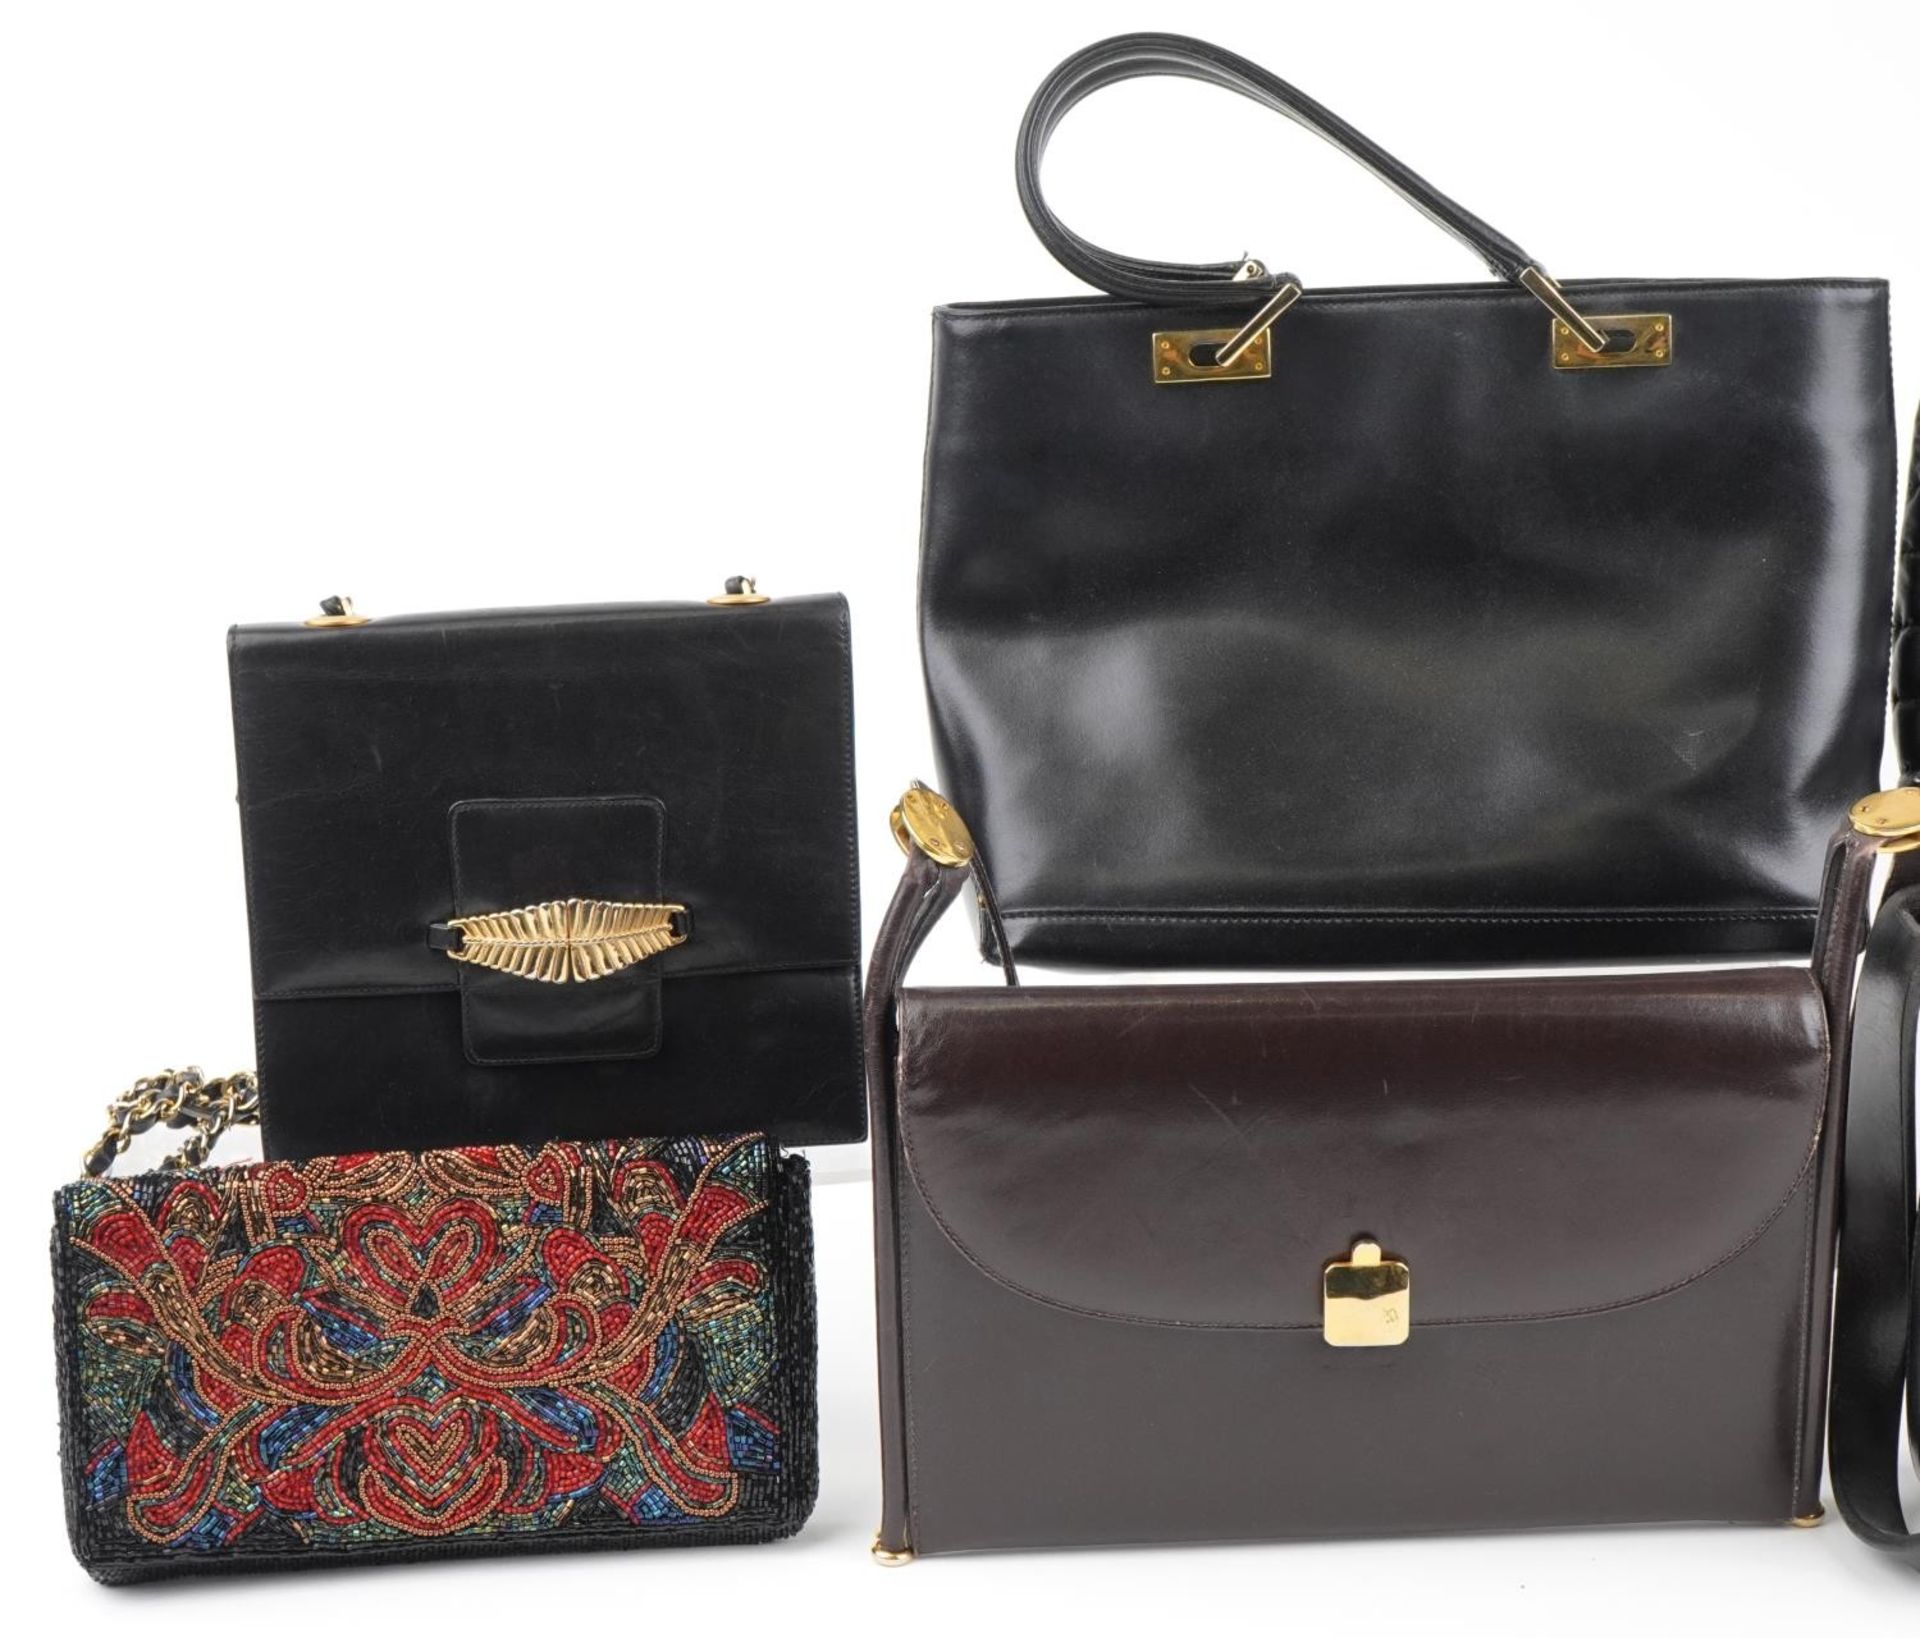 Eight vintage ladies handbags, some Italian, including Jaeger and taxidermy interest crocodile : For - Image 2 of 8